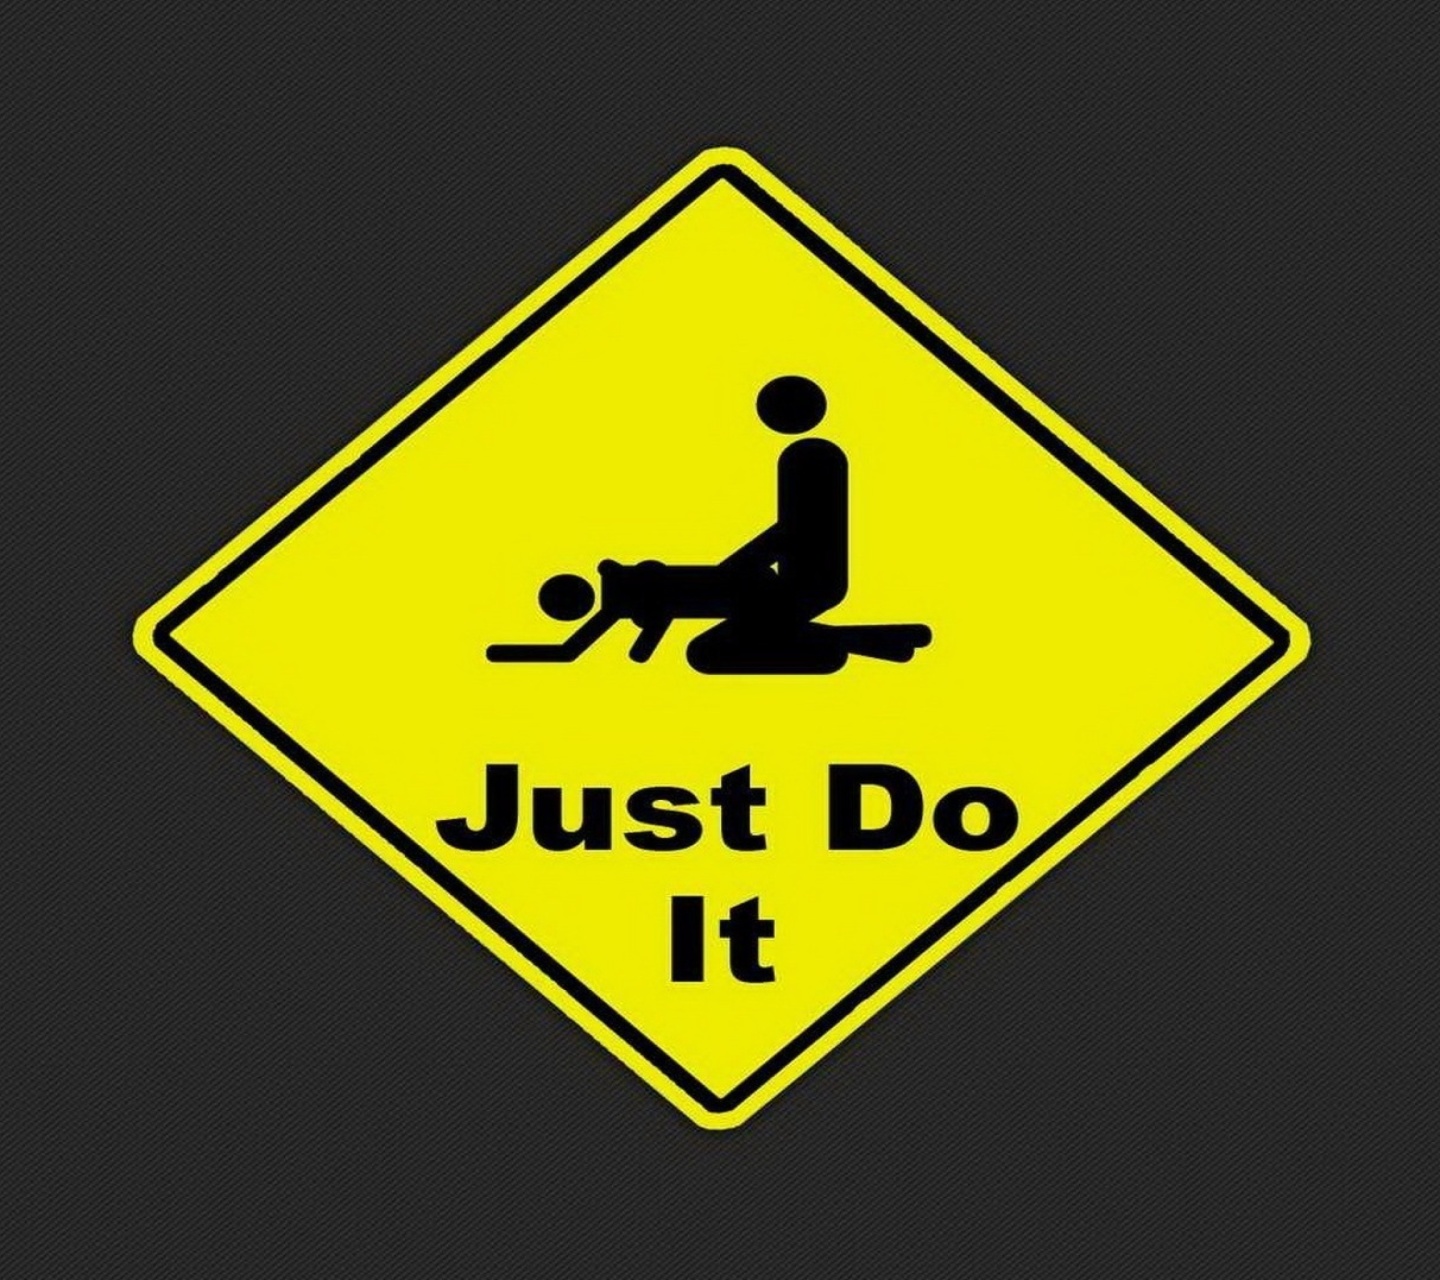 Das Just Do It Funny Sign Wallpaper 1440x1280